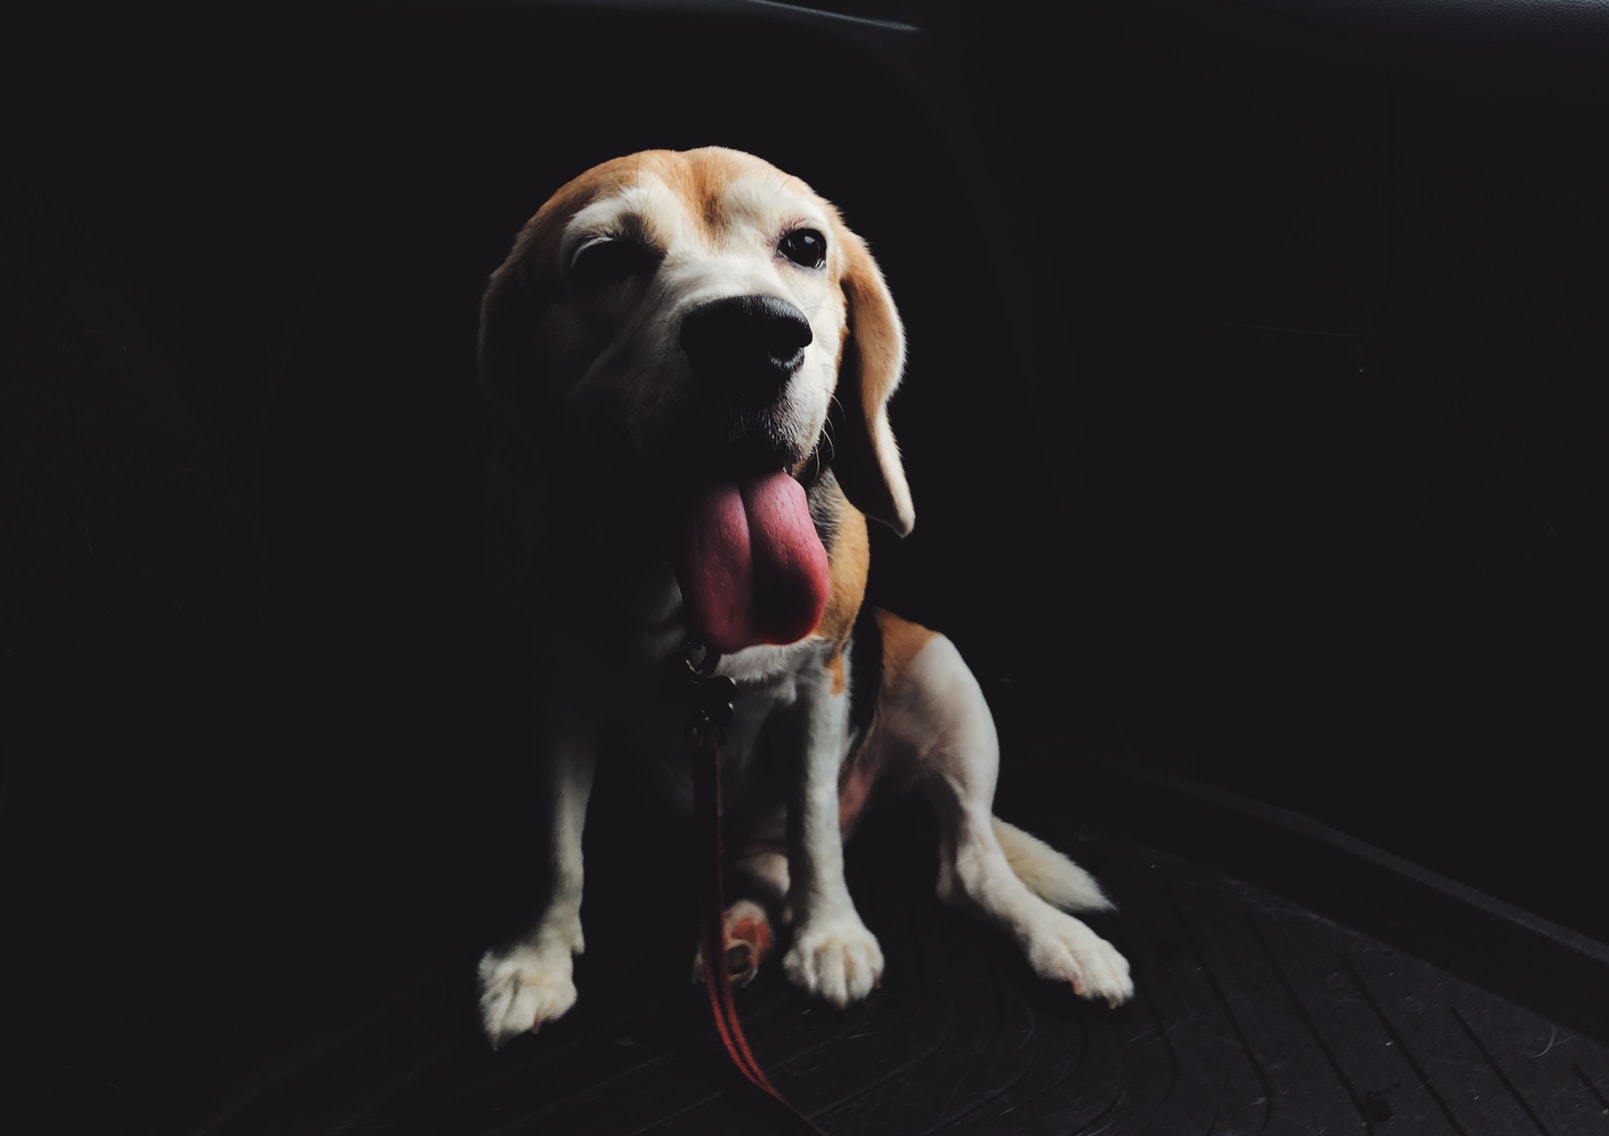 A Beagle sitting in a dark place while sticking its tongue out